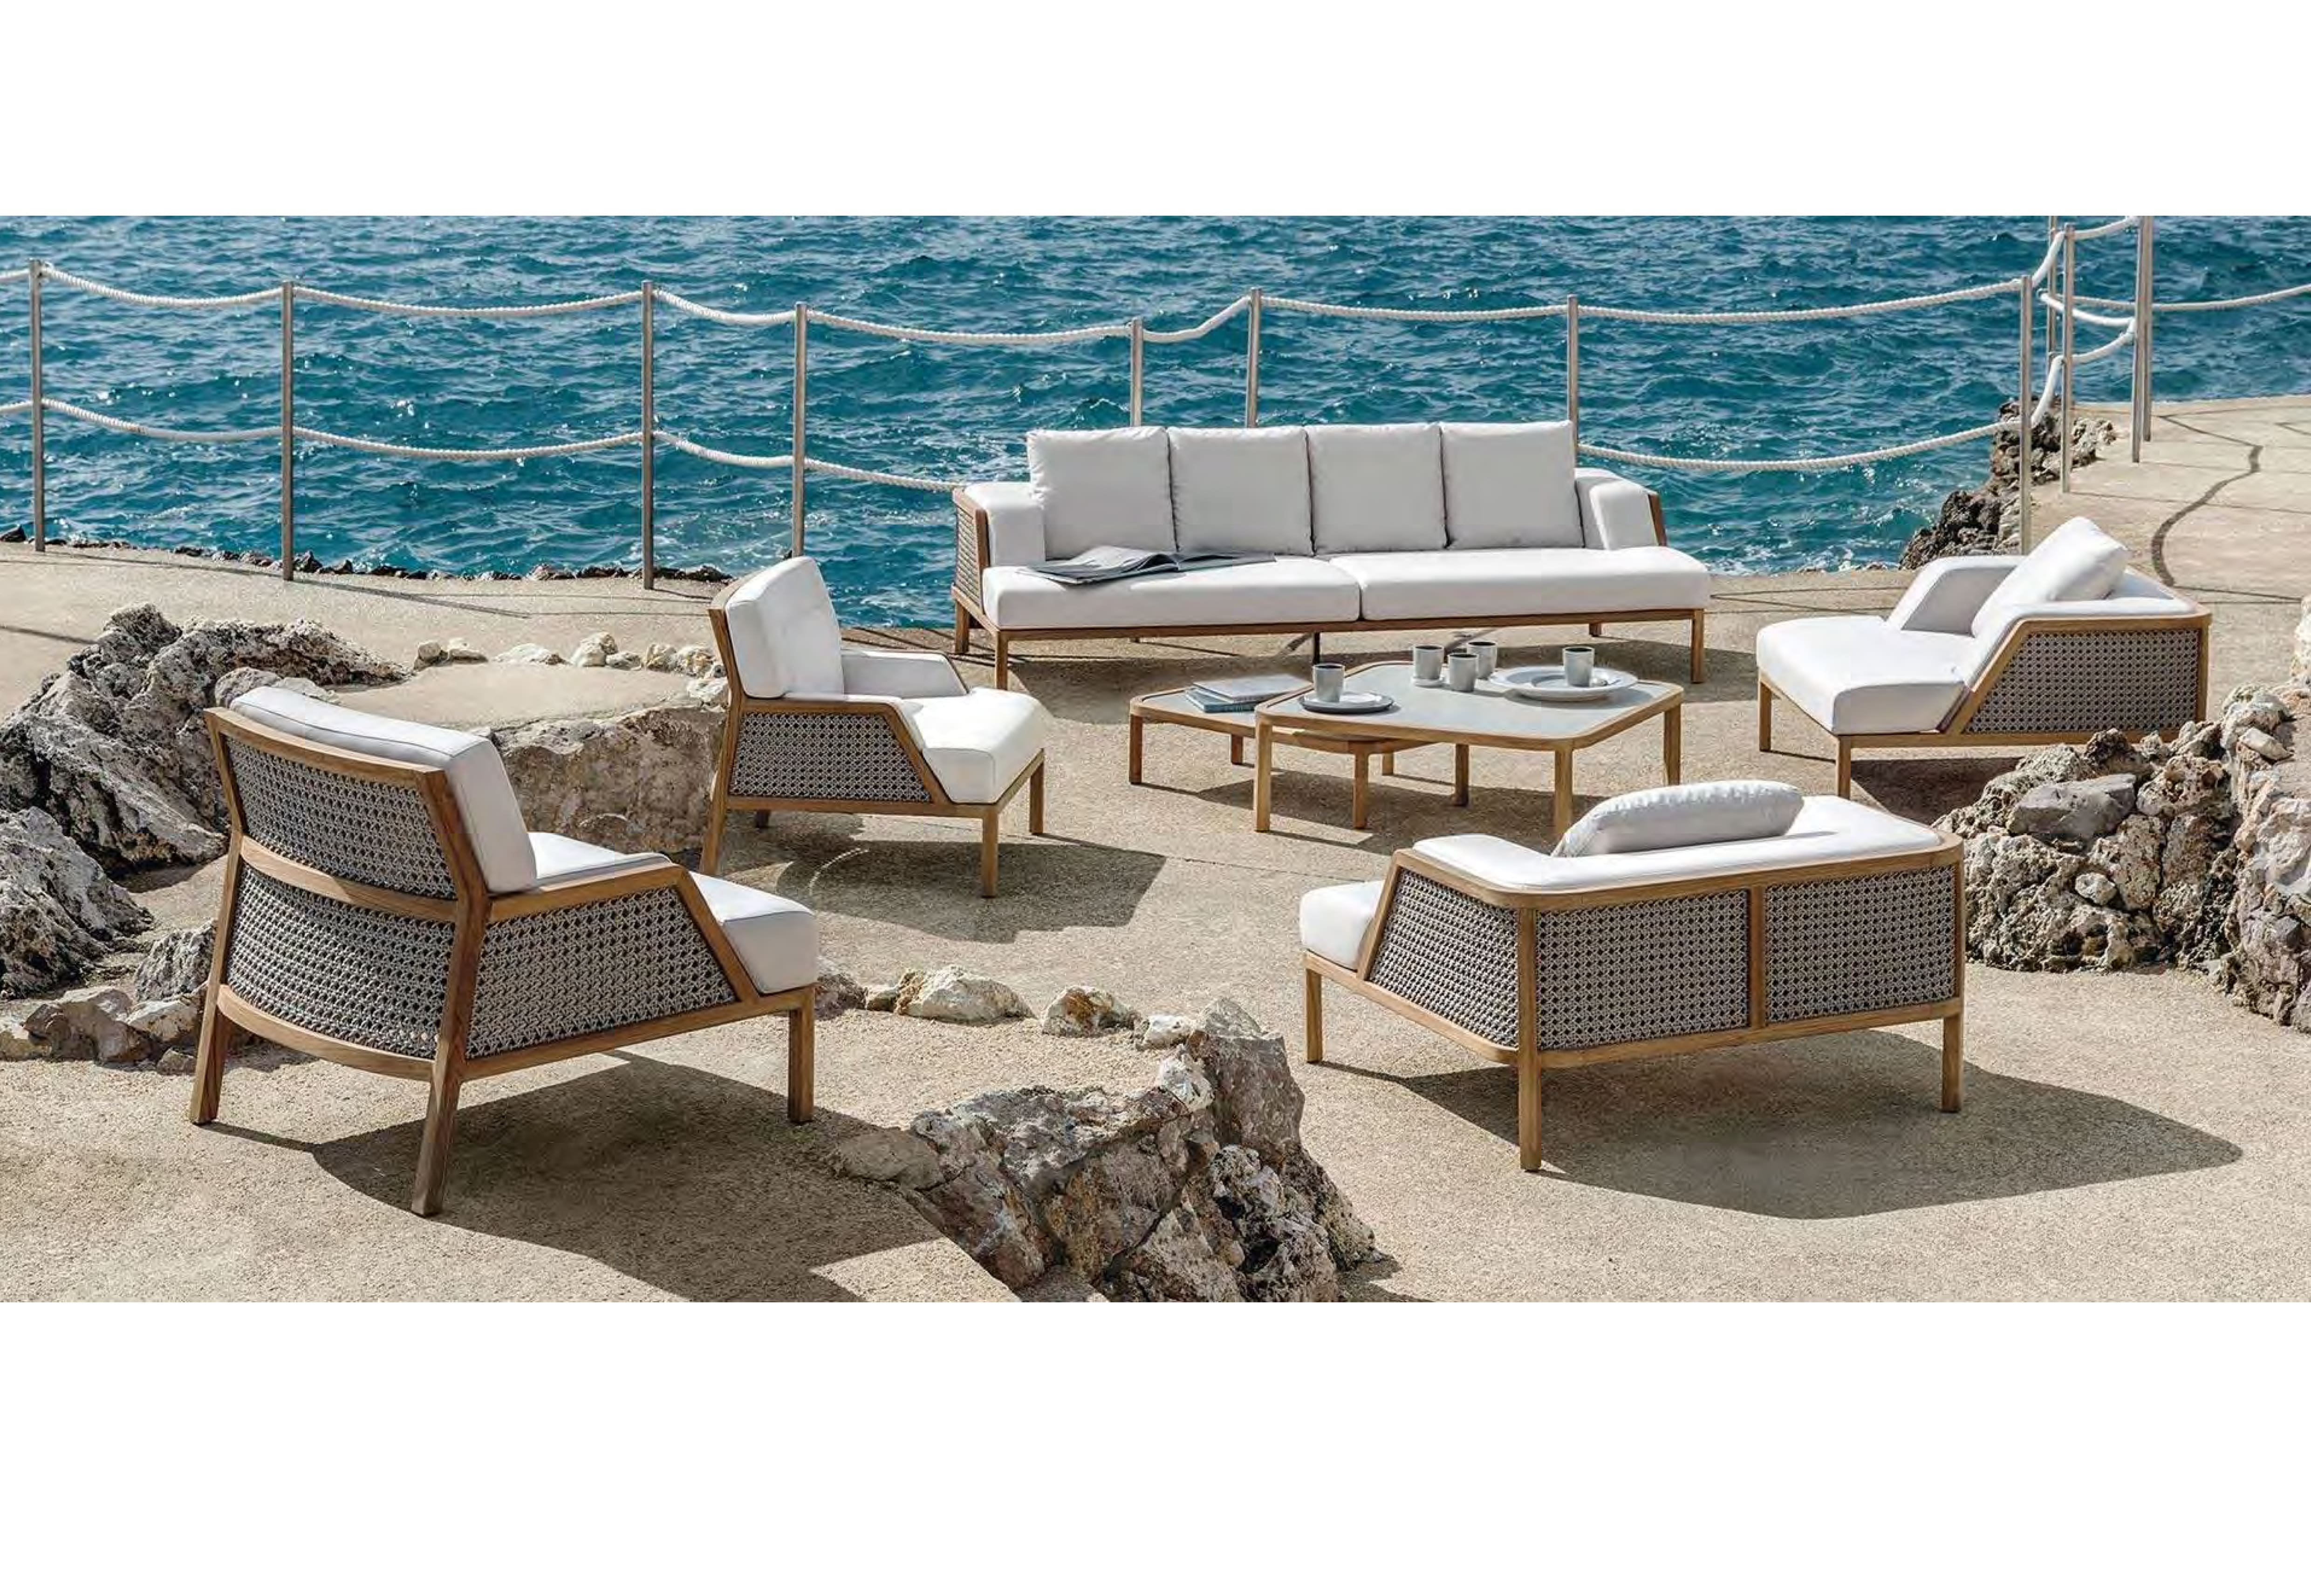 How to Choose the Right Outdoor Patio Furniture for You